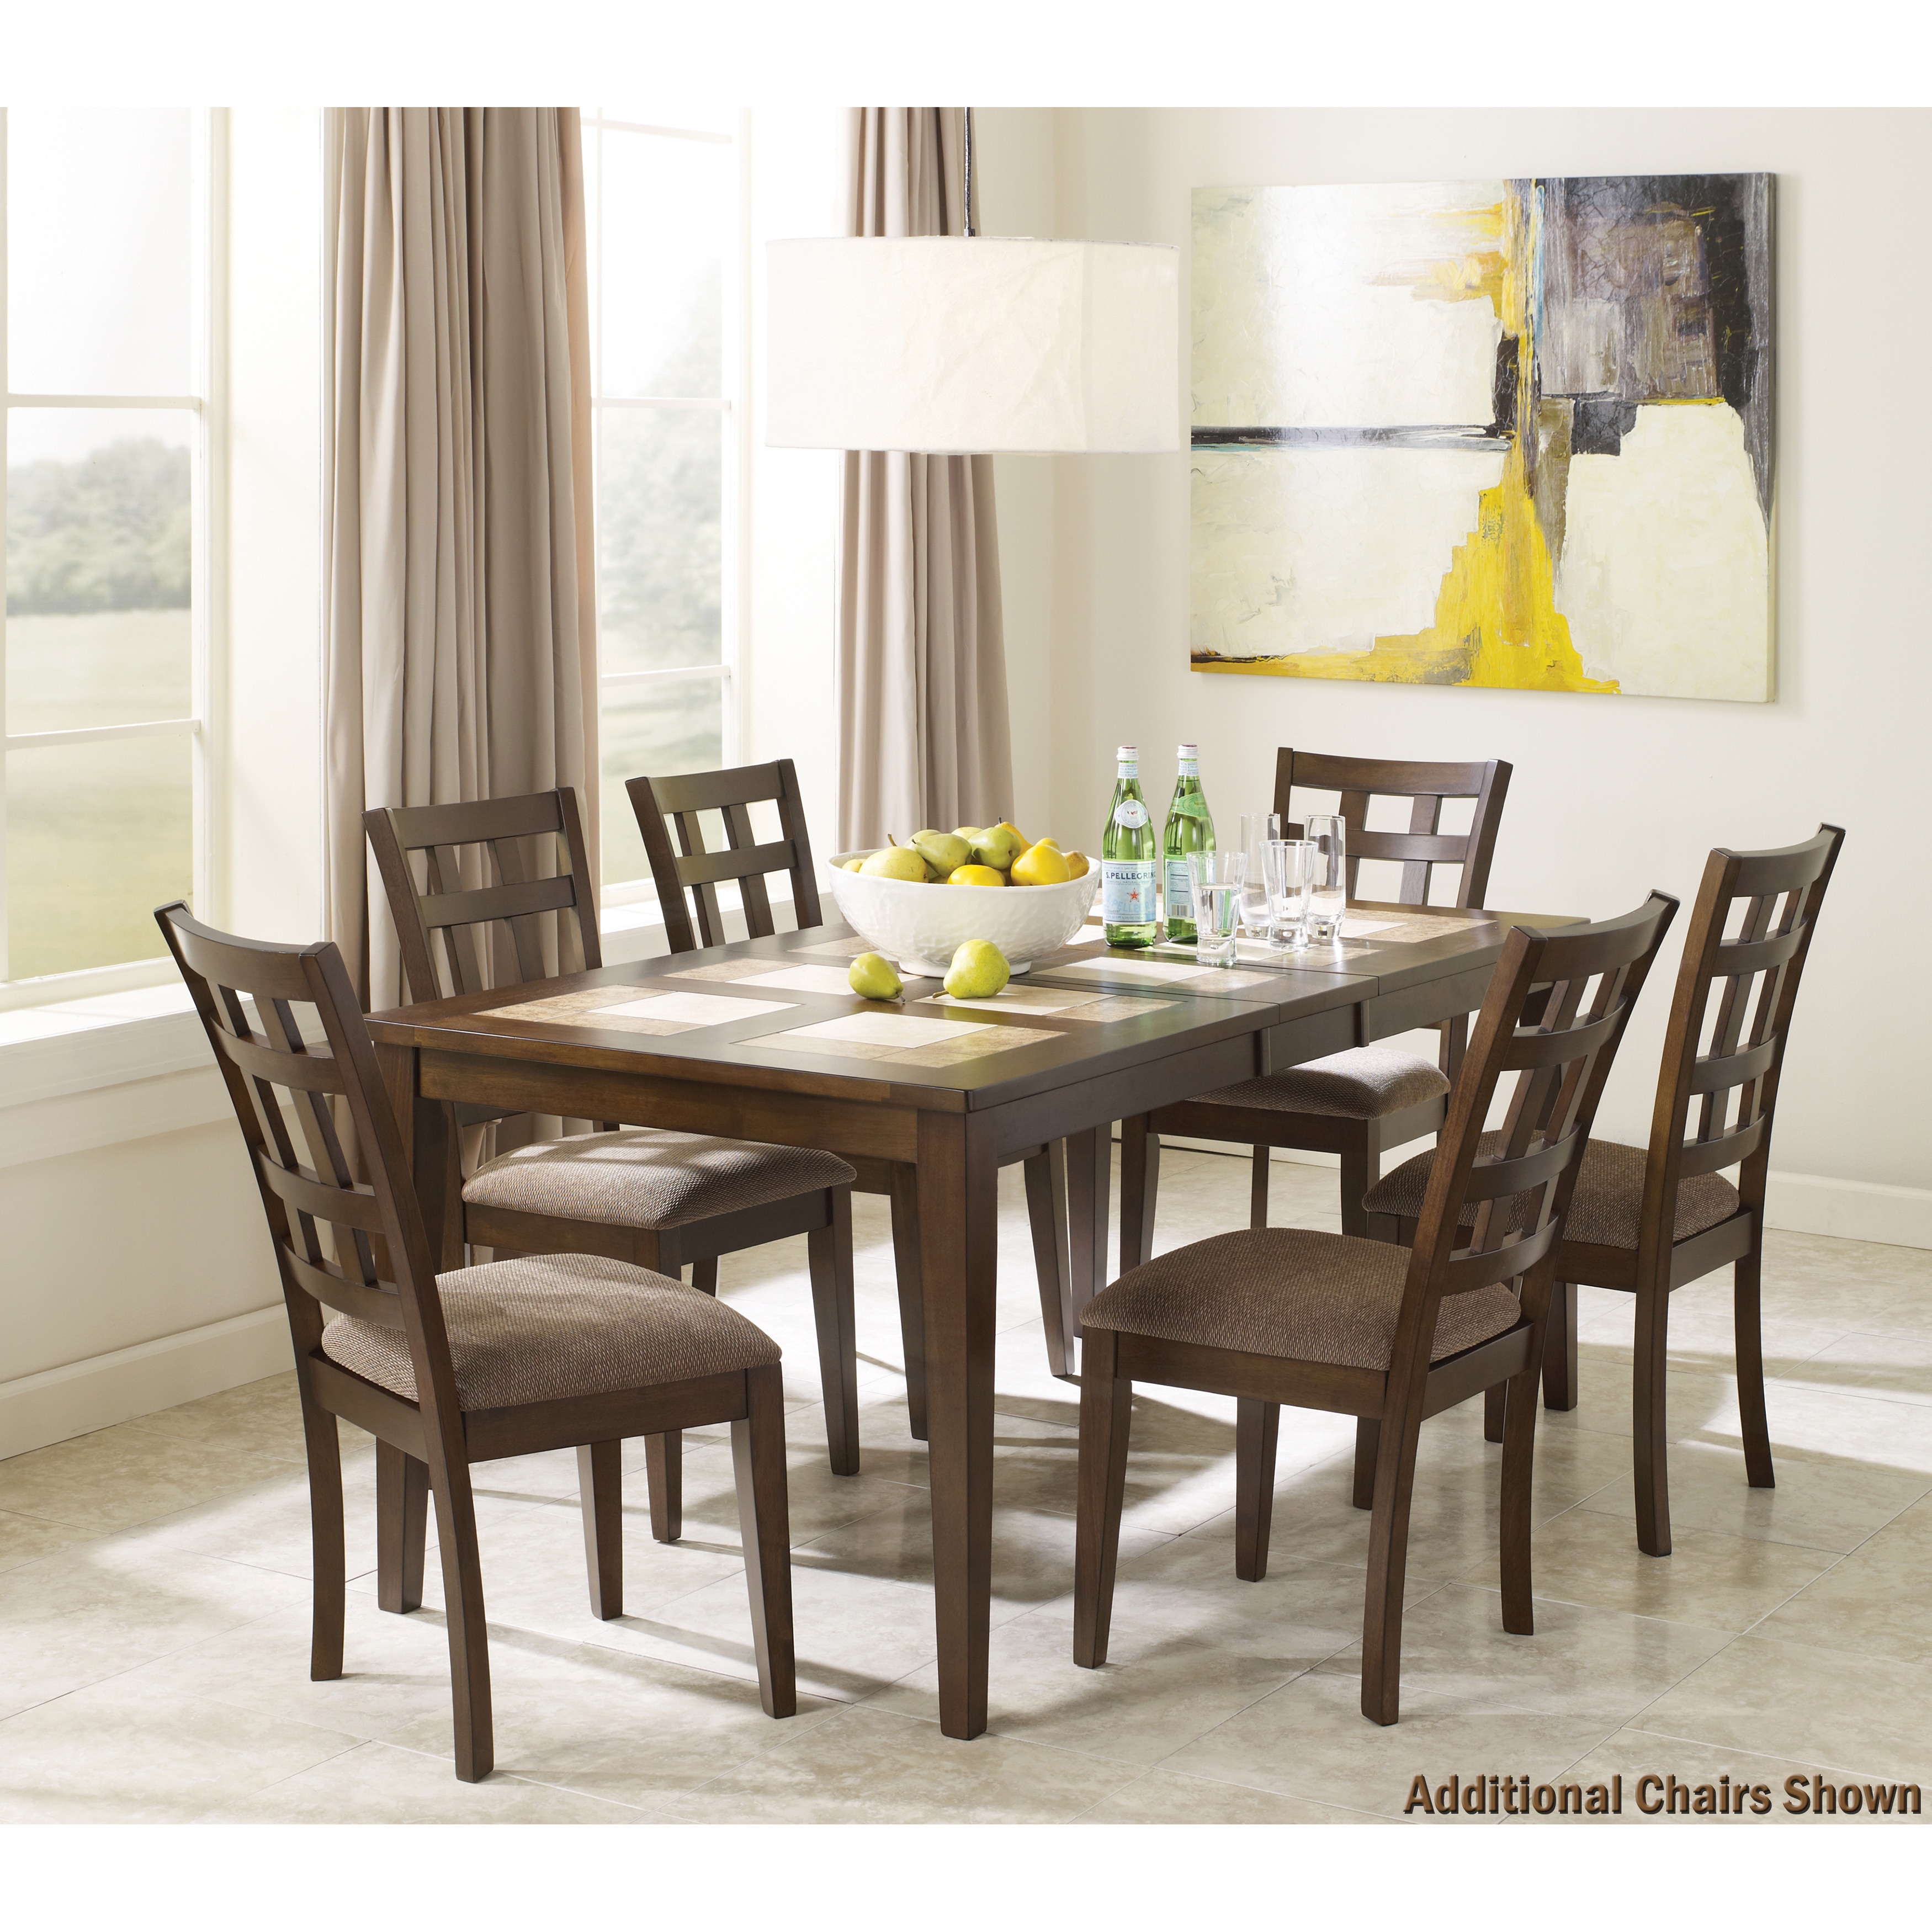 Get Stylish Art Van Dining Room Sets For Your Home Dining Room